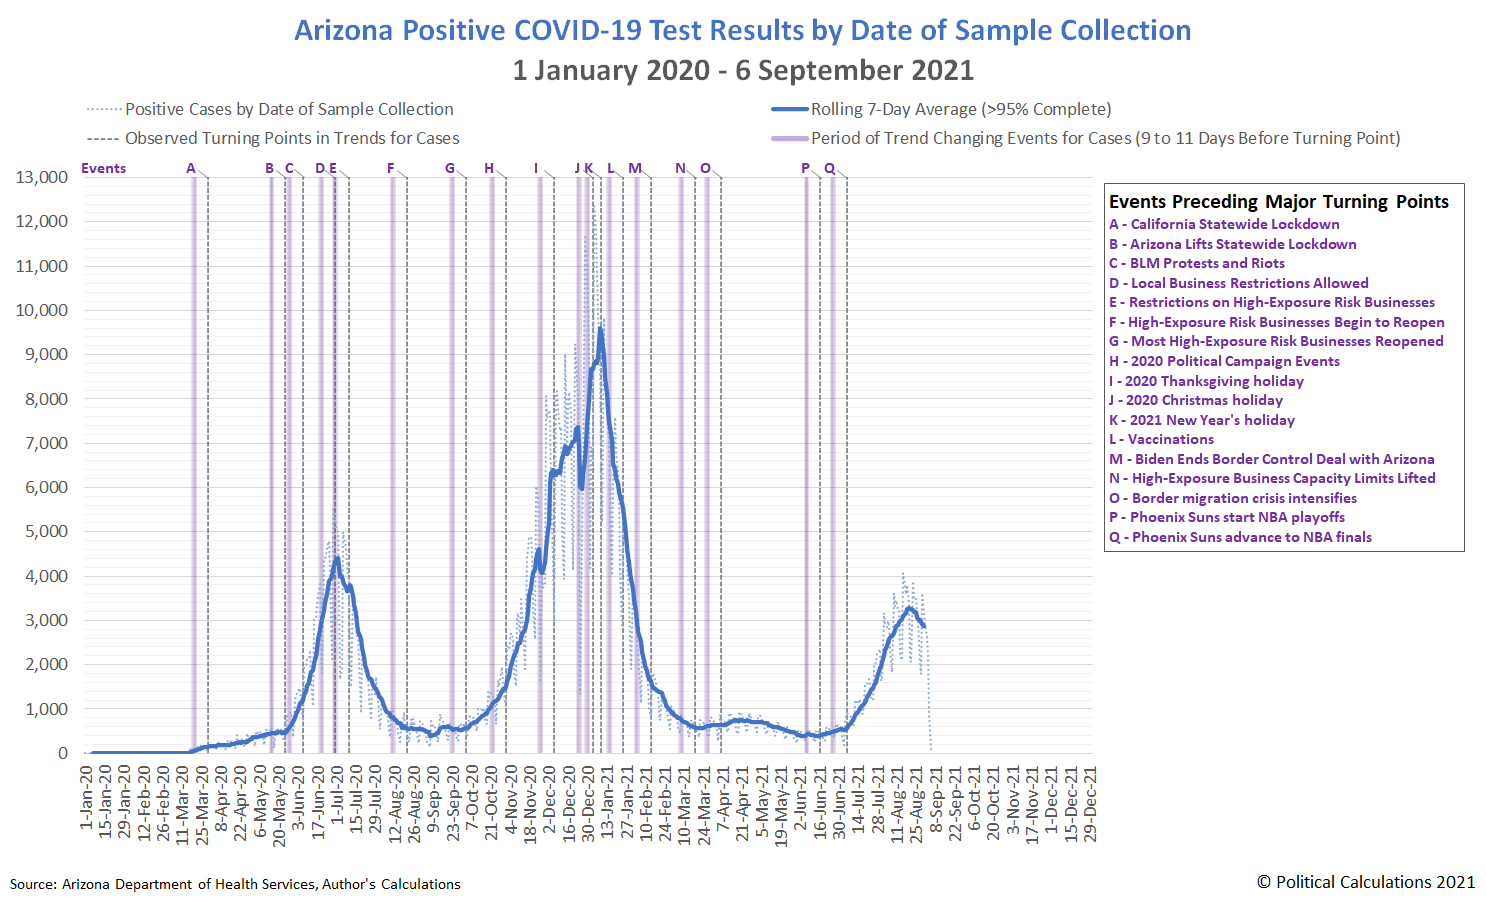 Animation: Arizona's Experience During the Coronavirus Pandemic, COVID Cases, New Hospital Admissions, Deaths, and ICU Bed Usage, 15 March 2020 - 6 September 2021, Linear Scale